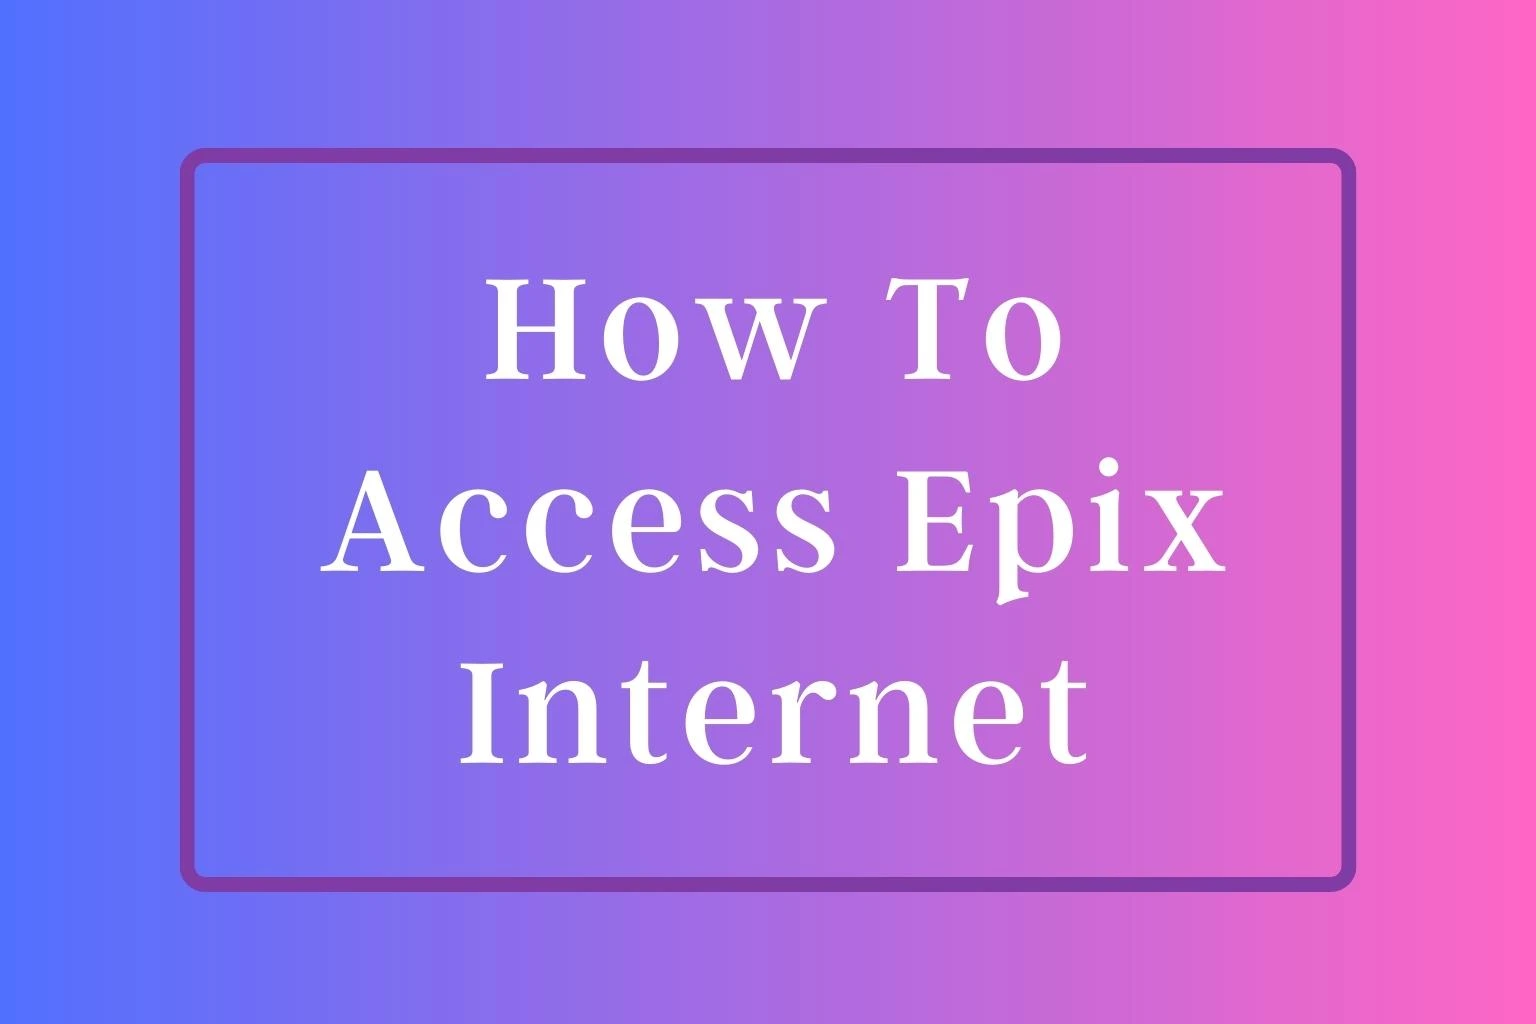 How To Access Epix Internet